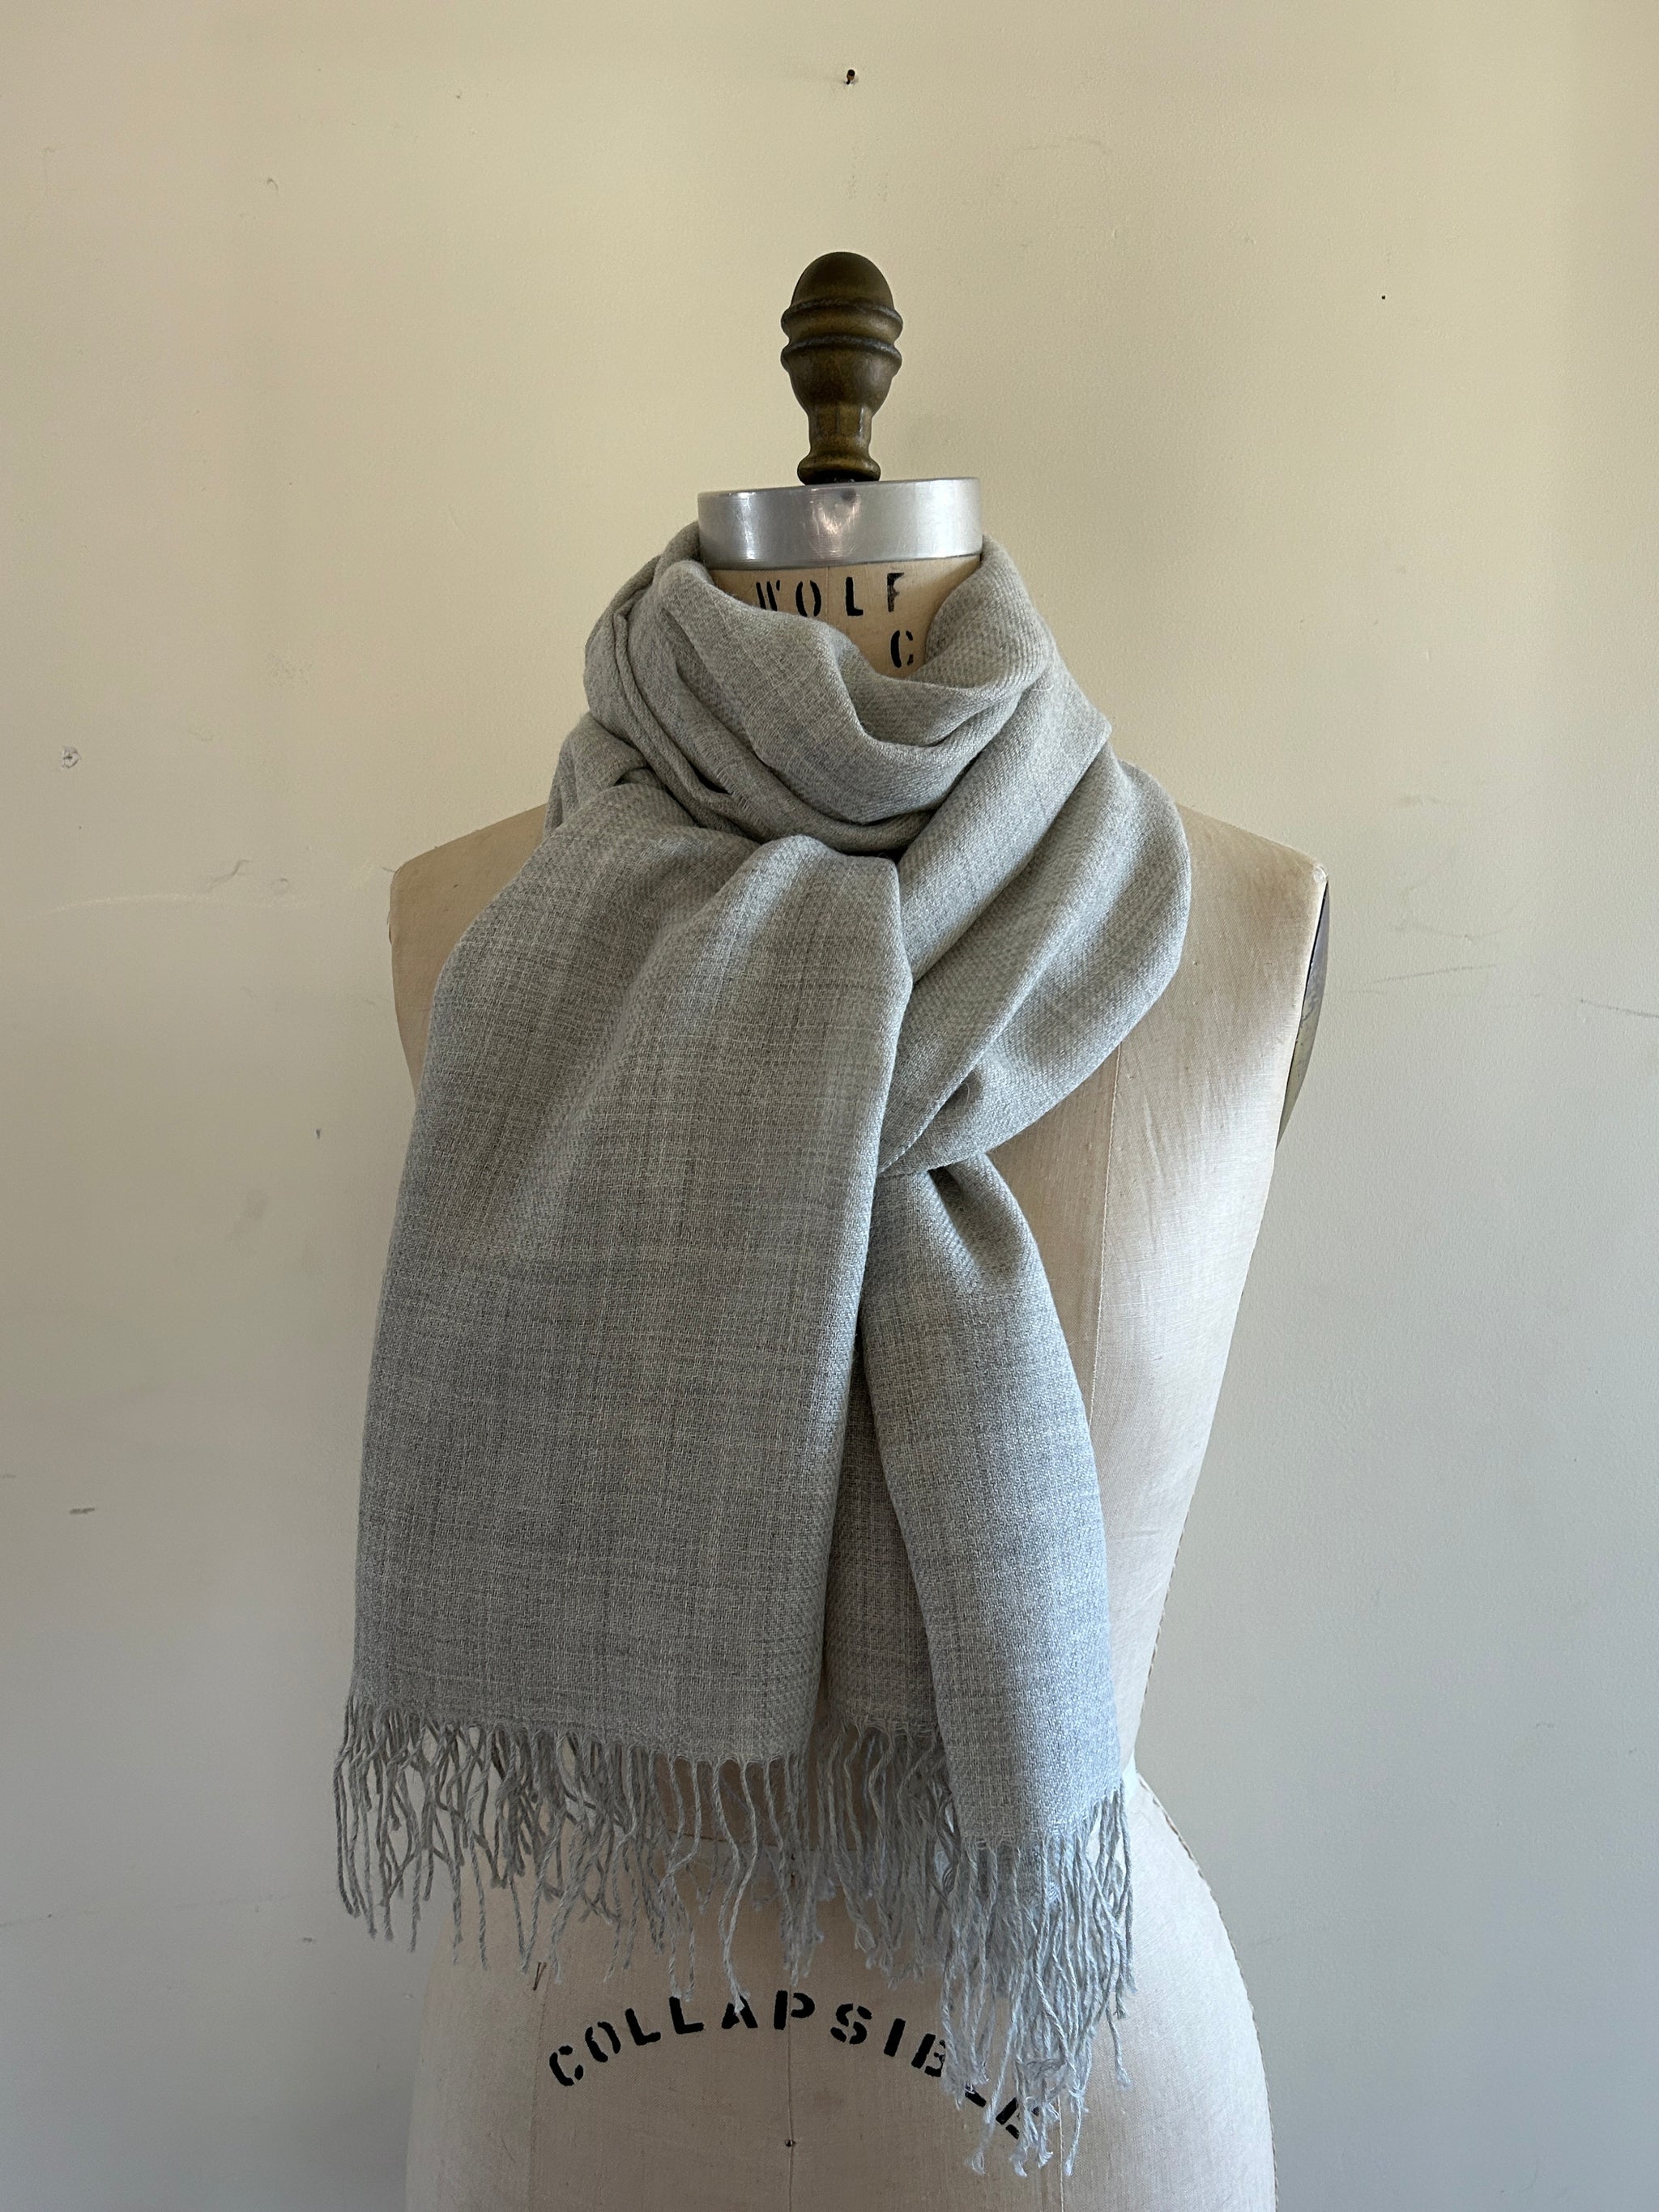 Light Grey Alpaca Throw Blanket, Lambswool Shawl, Blanket Scarf, Fall Scarf  Oversized, Lambswool Blanket, Hand-finished with Fringed Edges - Bedding